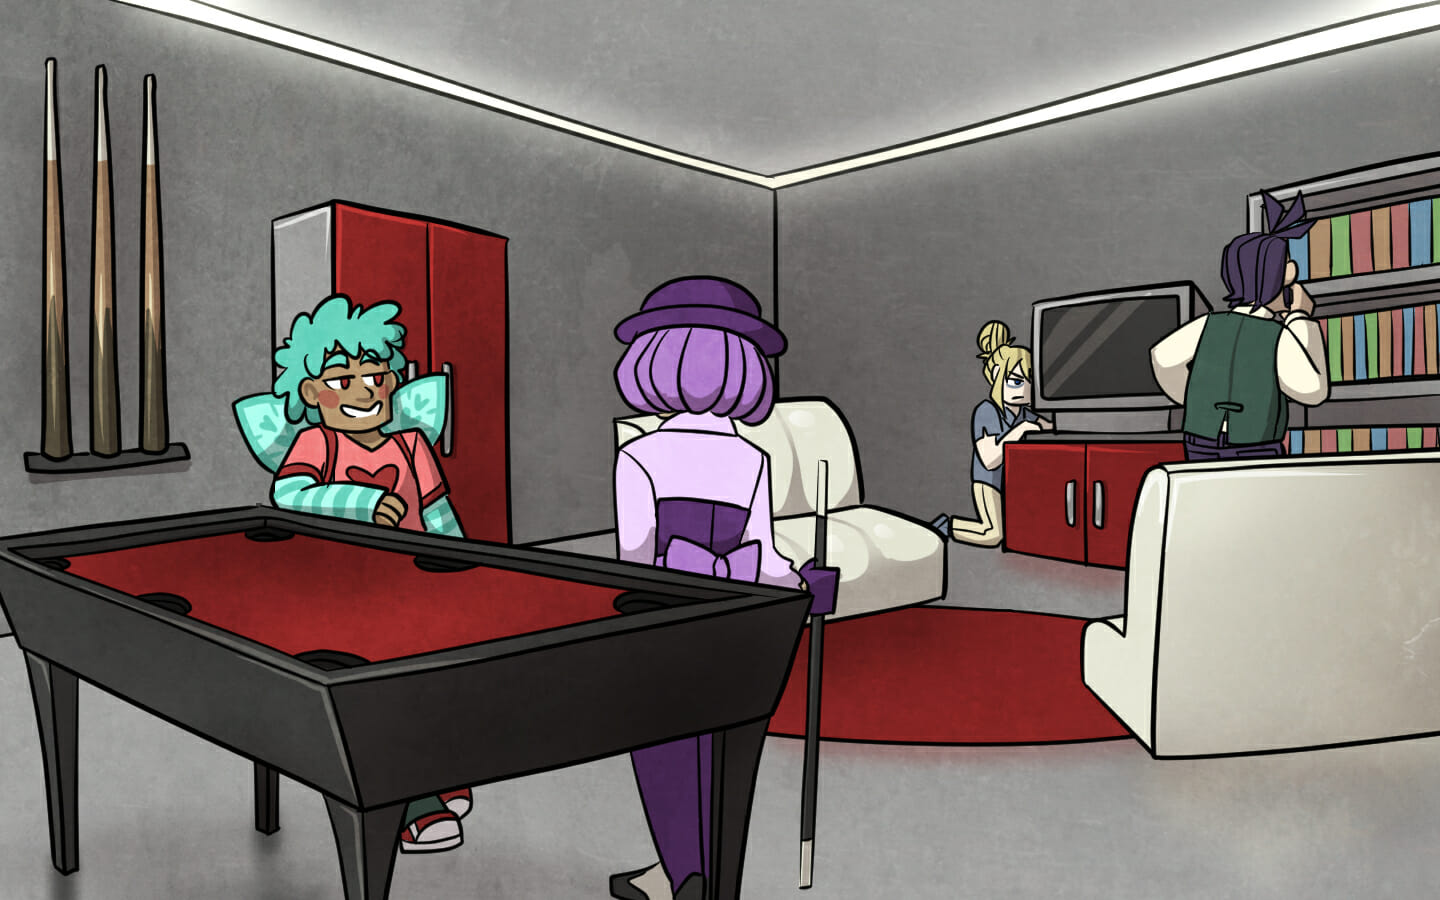 The rec room. Michi and Honoka are talking by the pool table, while Tiffani inspects the TV and Nikola looks through a cabinet.